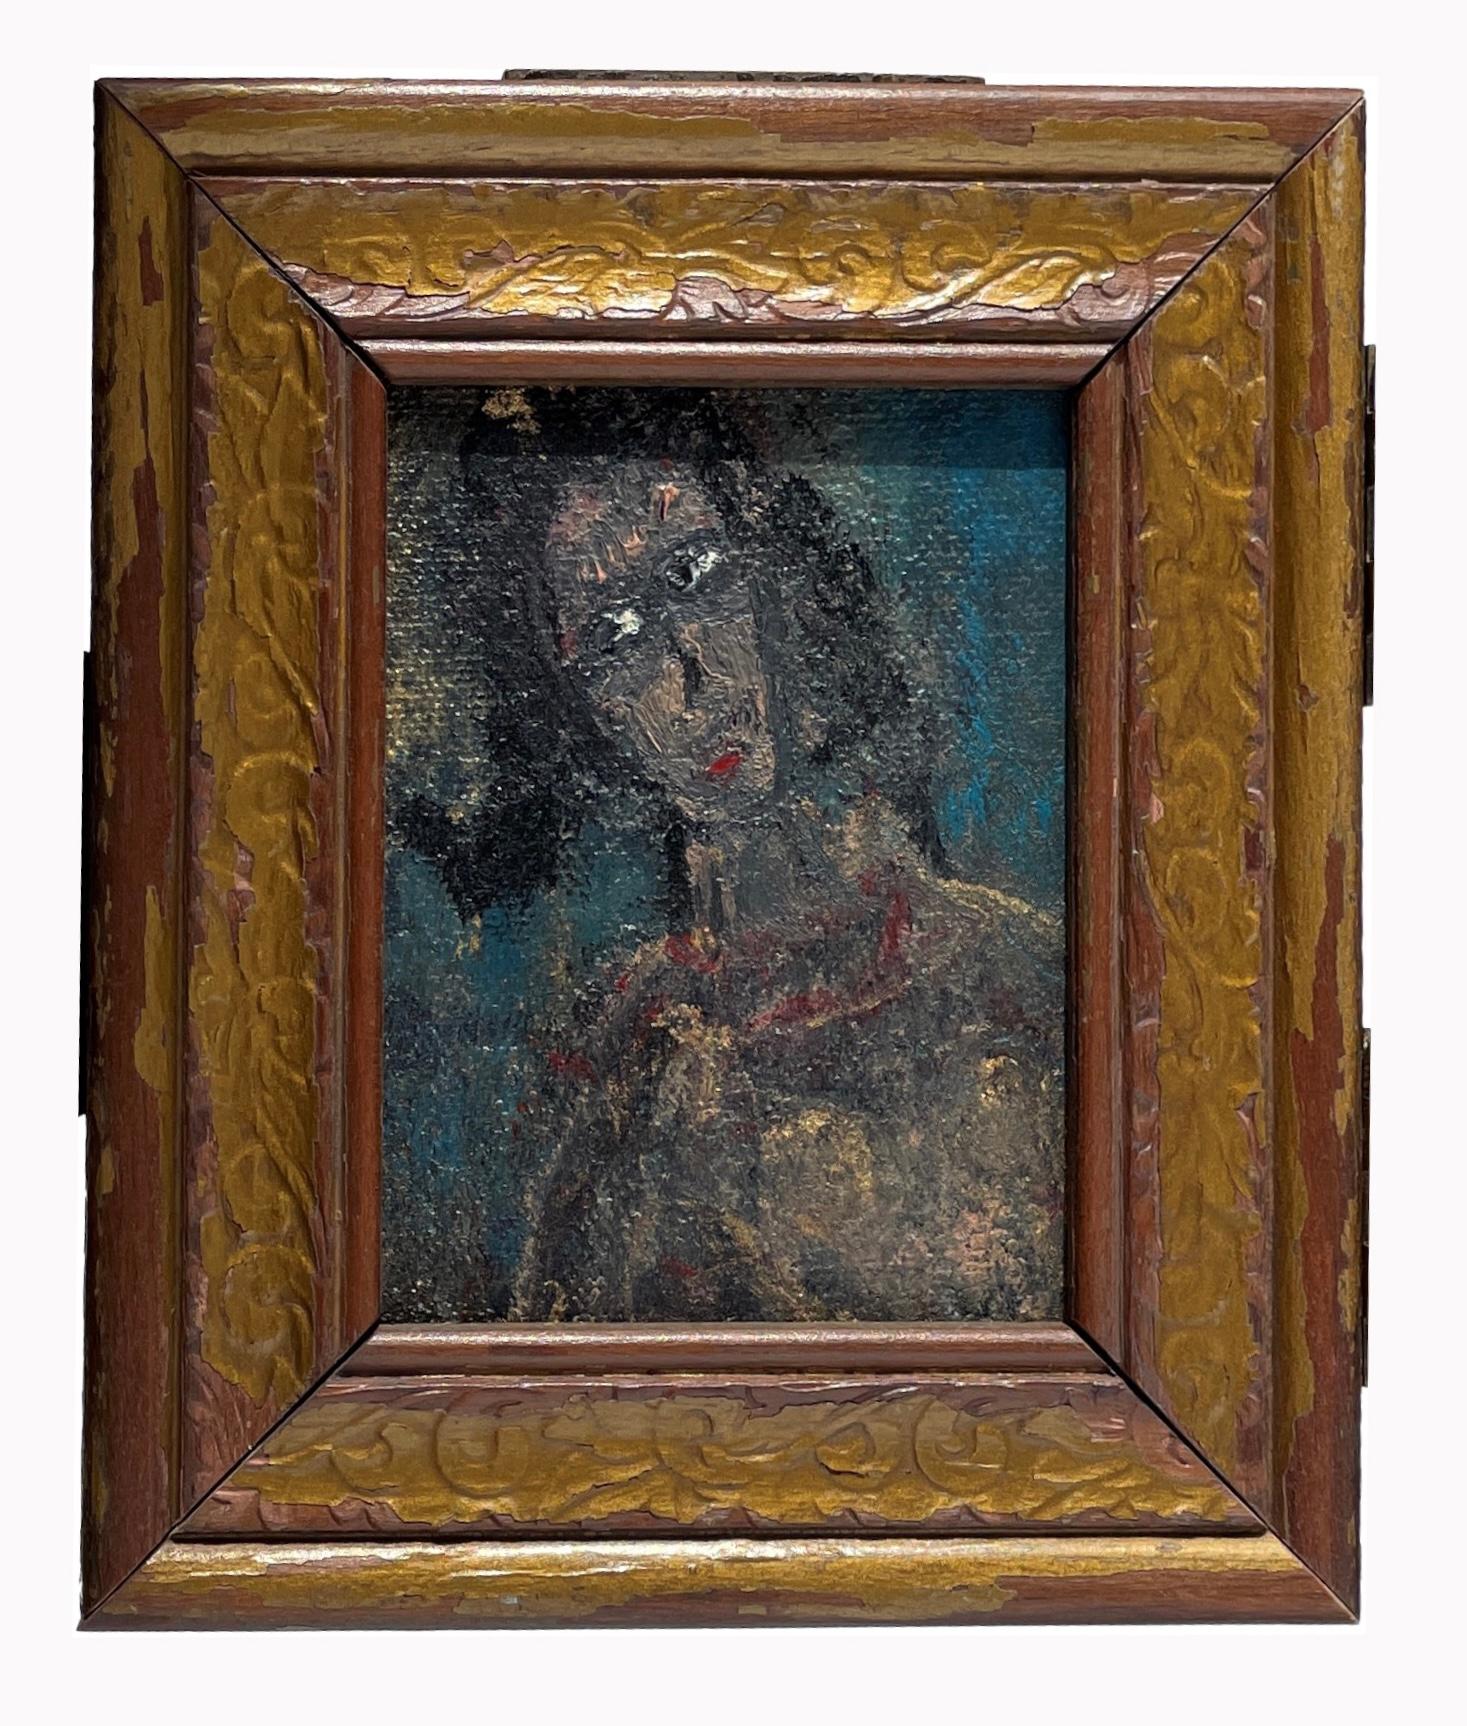 Hand-Crafted Vanity Mirror with Two Portrait Paintings and  Found Objects